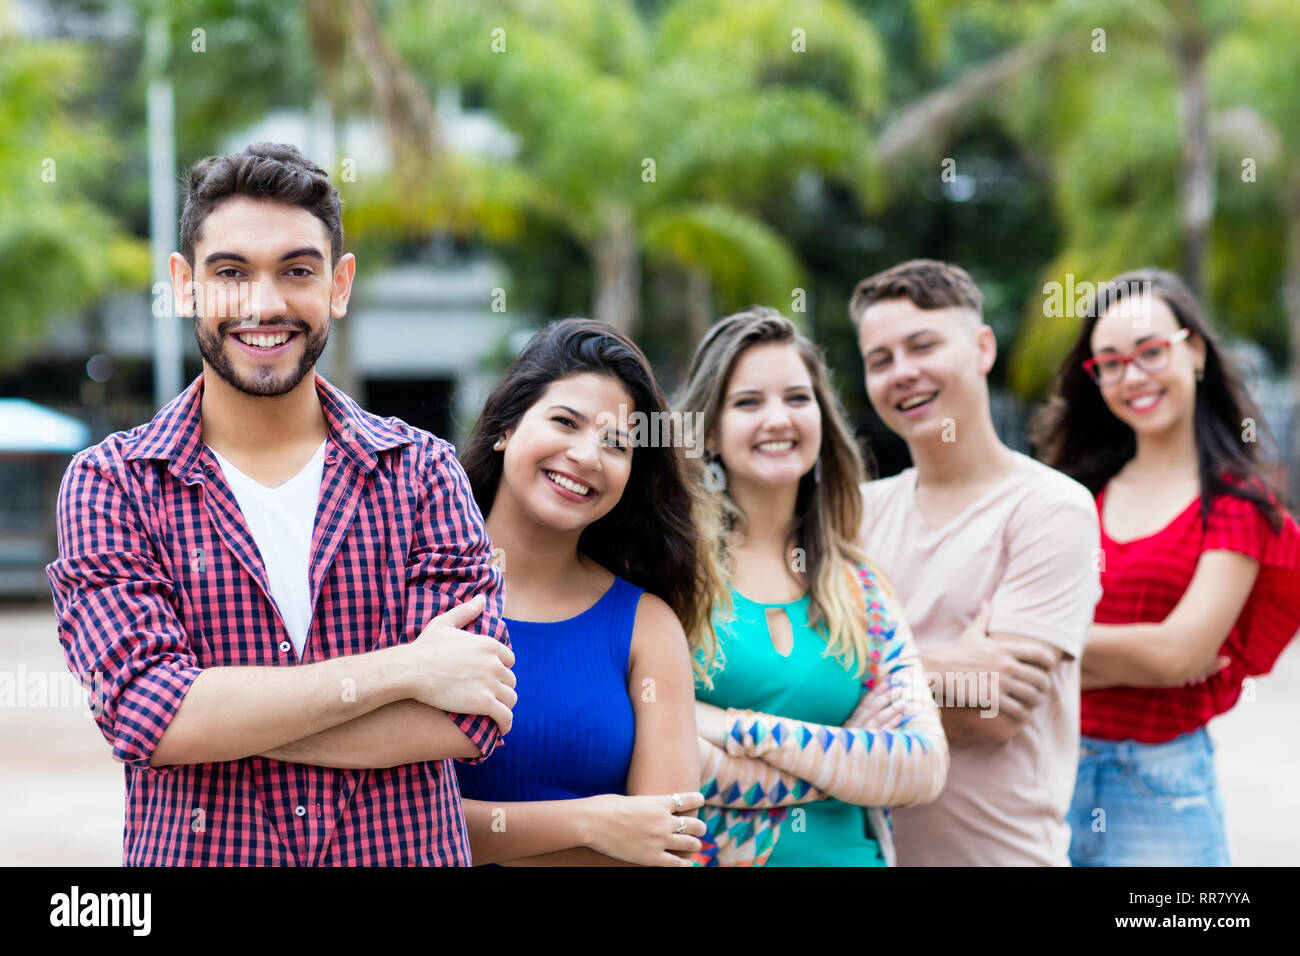 Spanish hipster man with male and female young adults in line outdoor in the city Stock Photo